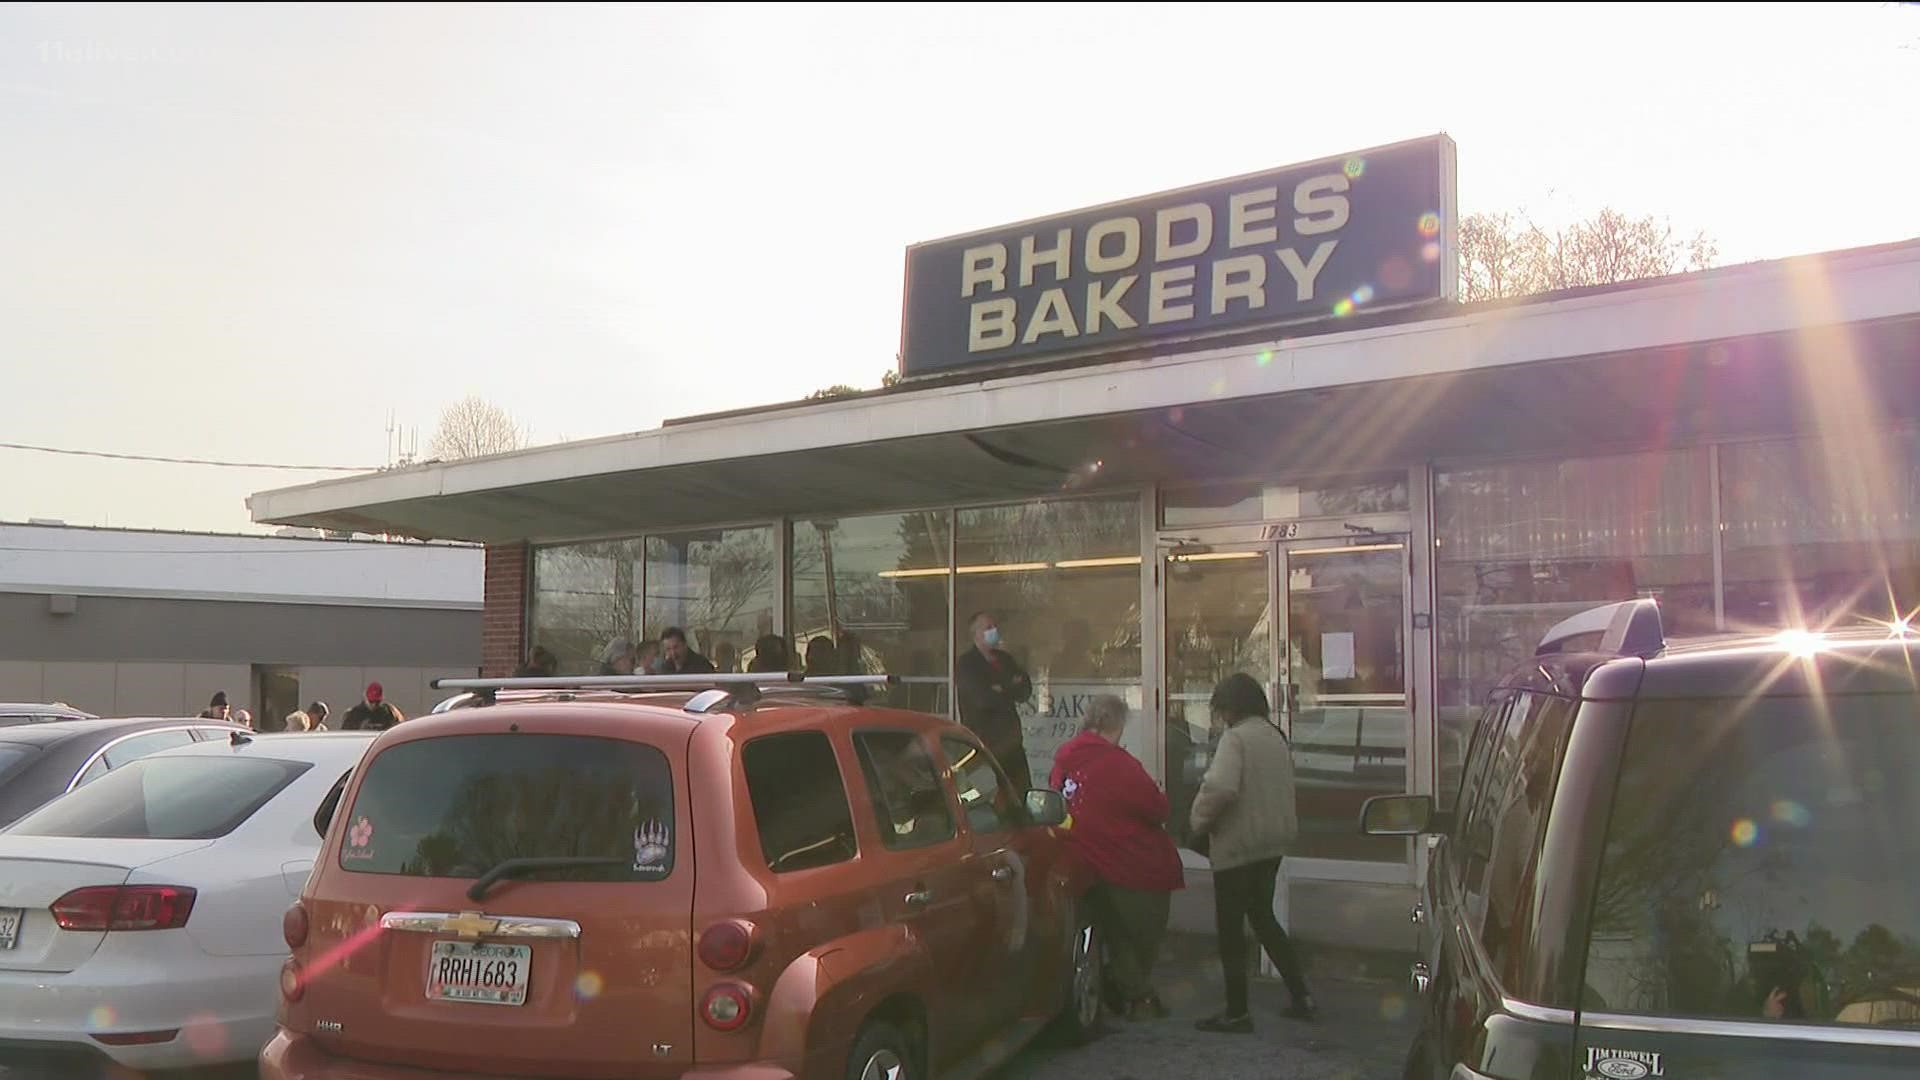 After 68 years in business, the bakery on Cheshire Bridge Rd. is closing its doors.